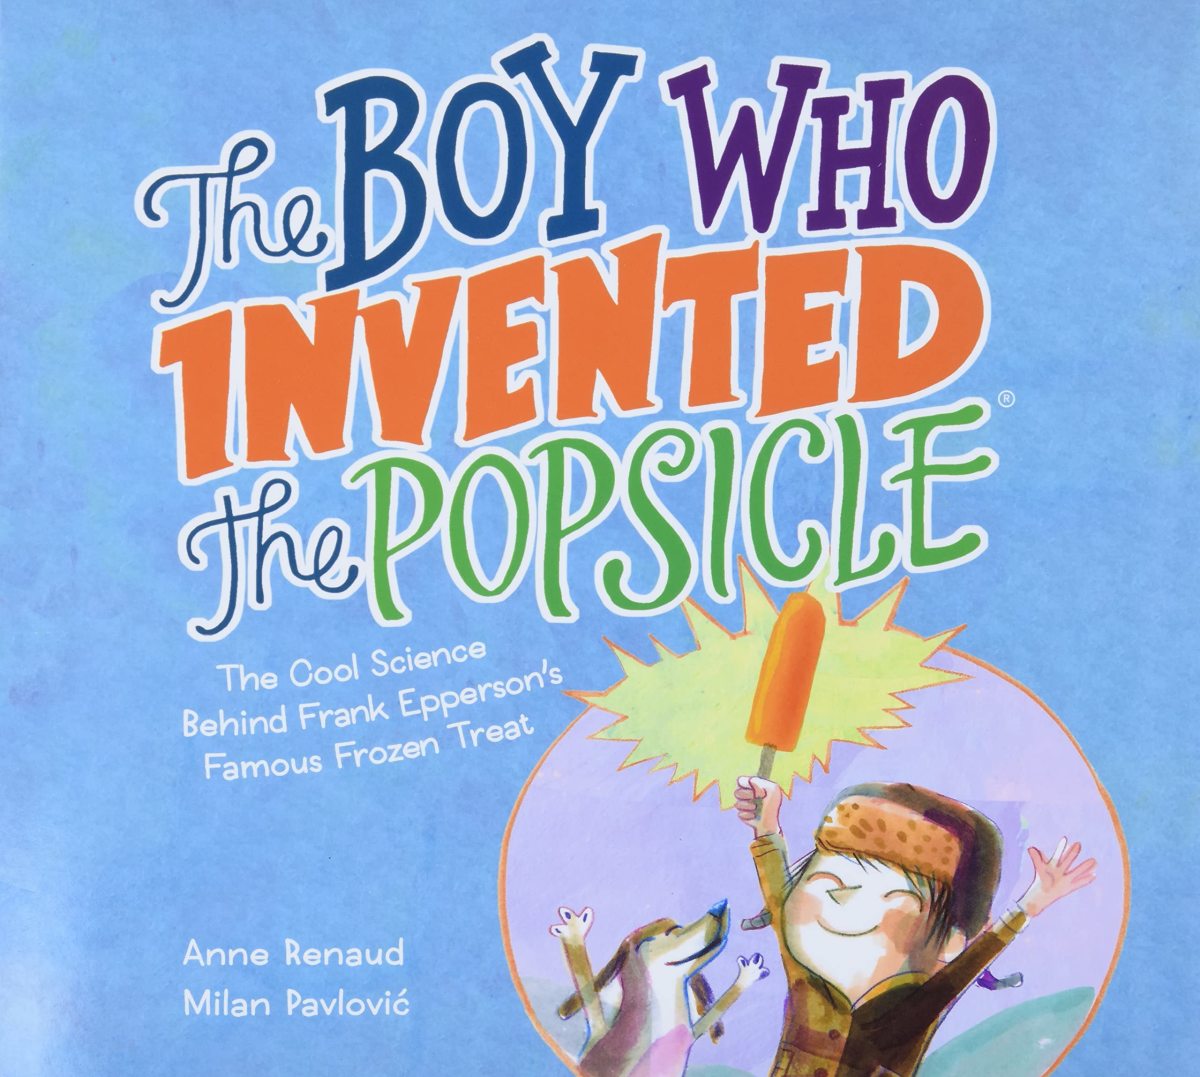 The Boy Who Invented the Popsicle: The Cool Science Behind Frank Epperson’s Famous Frozen Treat by Anne Renaud